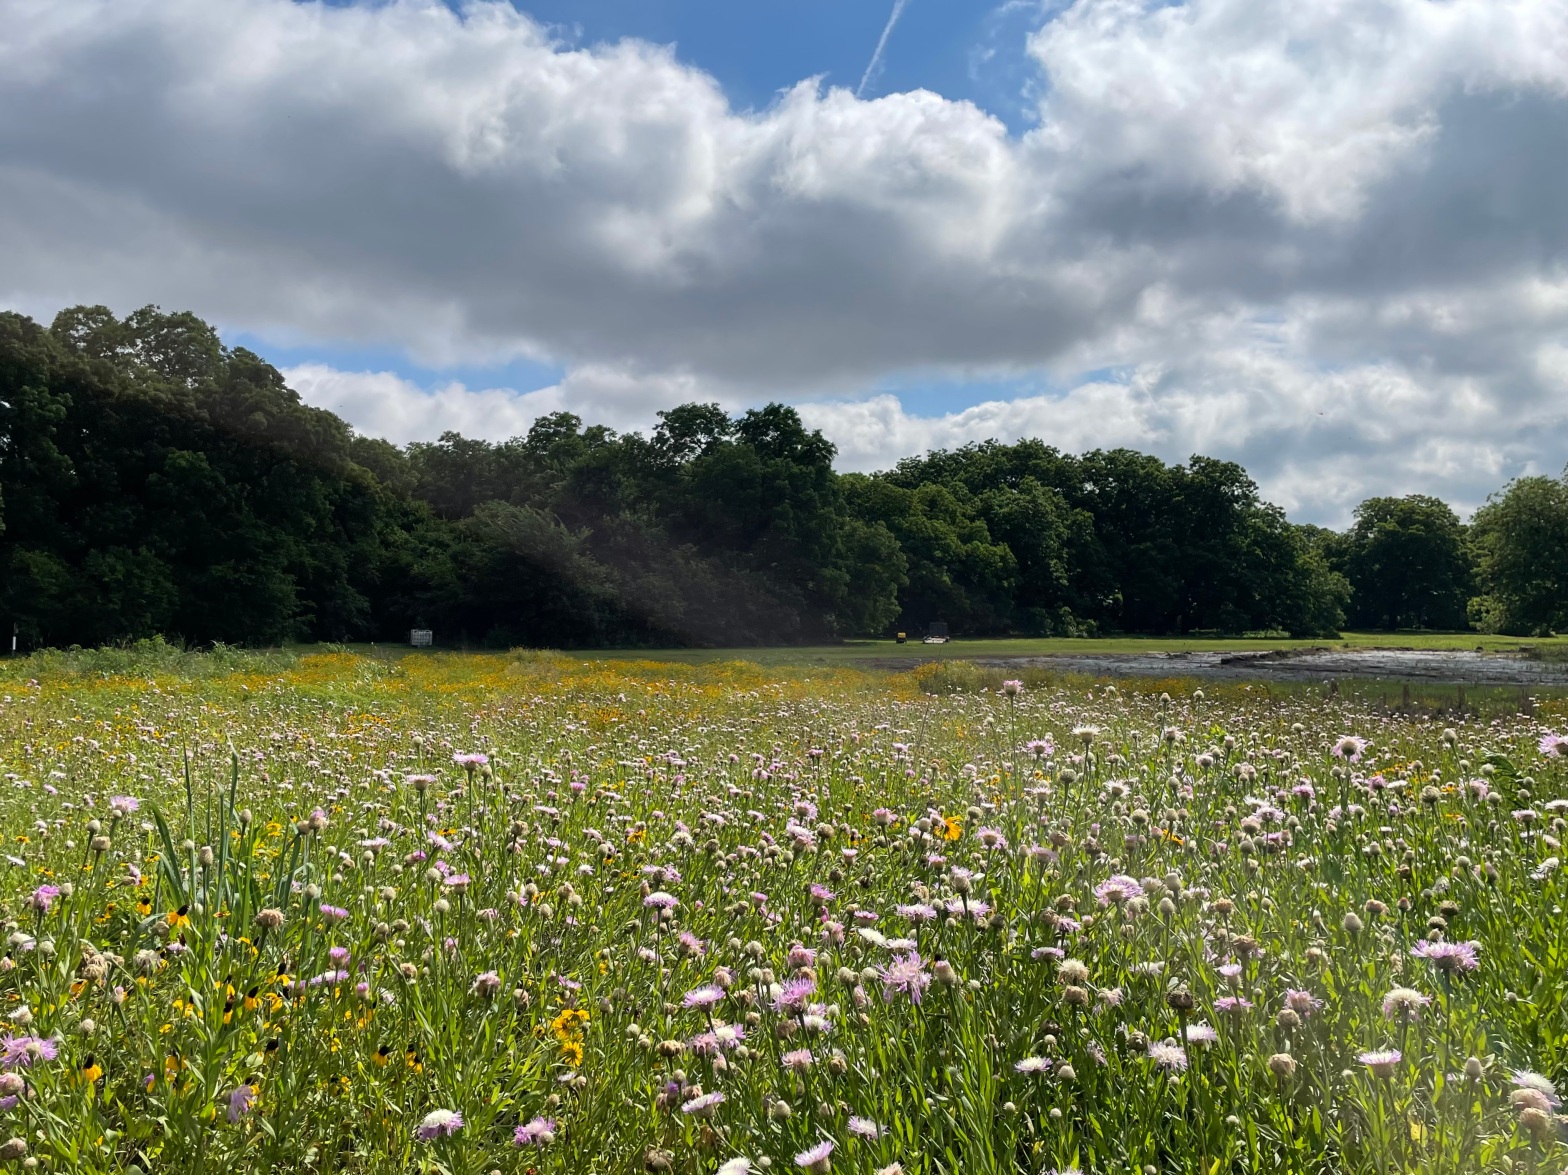 Photo of a field of wildflowers with trees in the distance